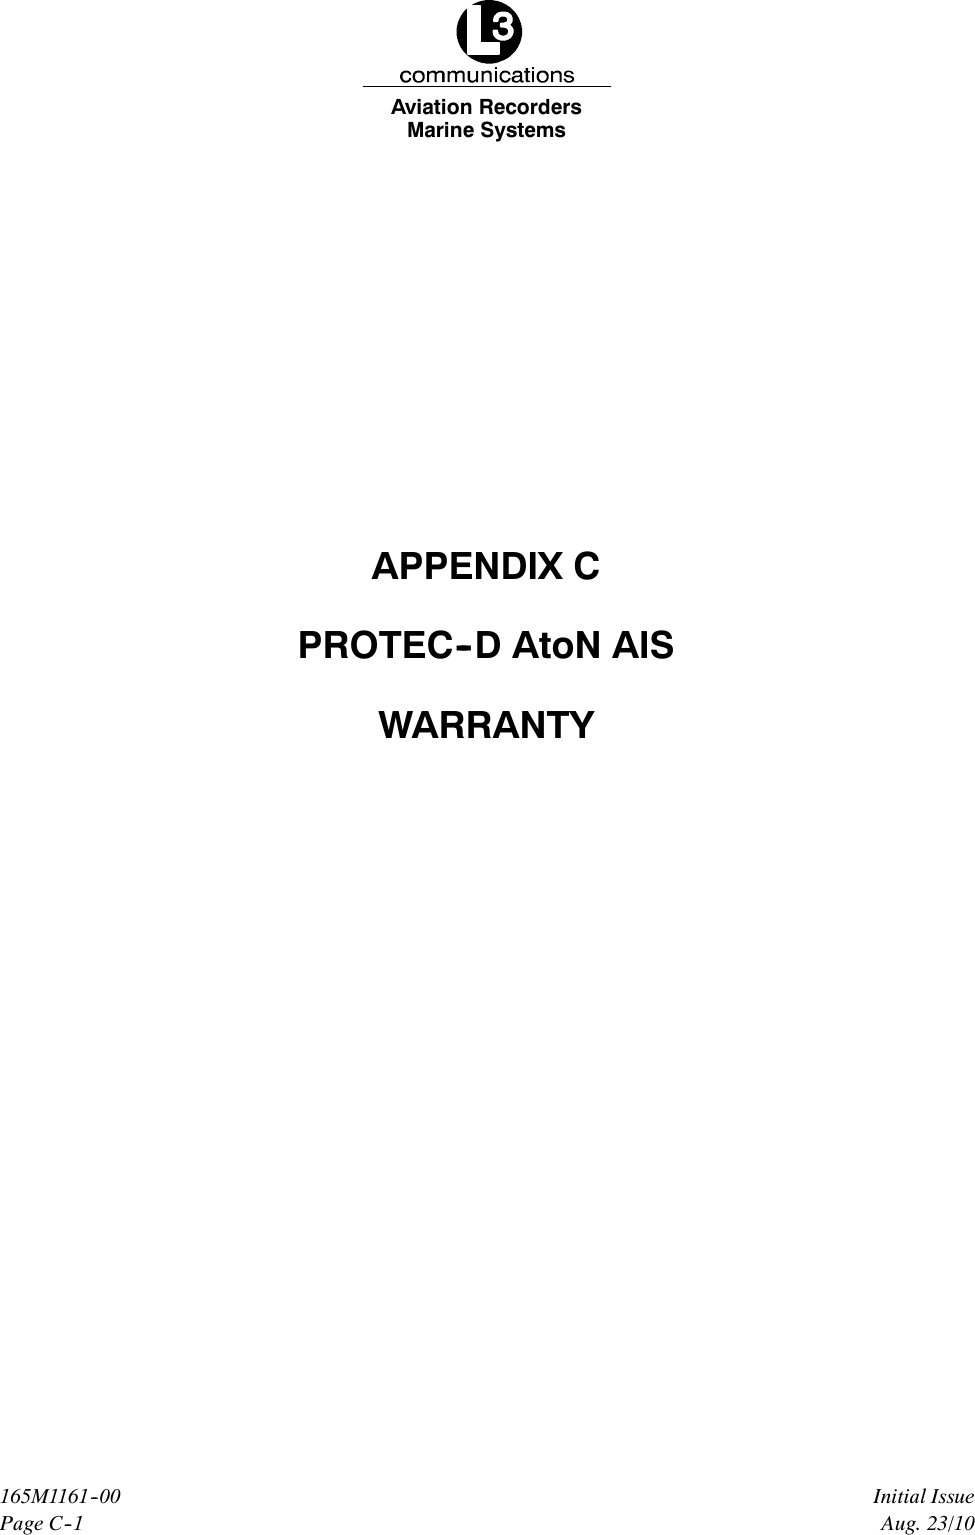 Marine SystemsAviation RecordersPage C--1Initial Issue165M1161--00Aug. 23/10APPENDIX CPROTEC--D AtoN AISWARRANTY